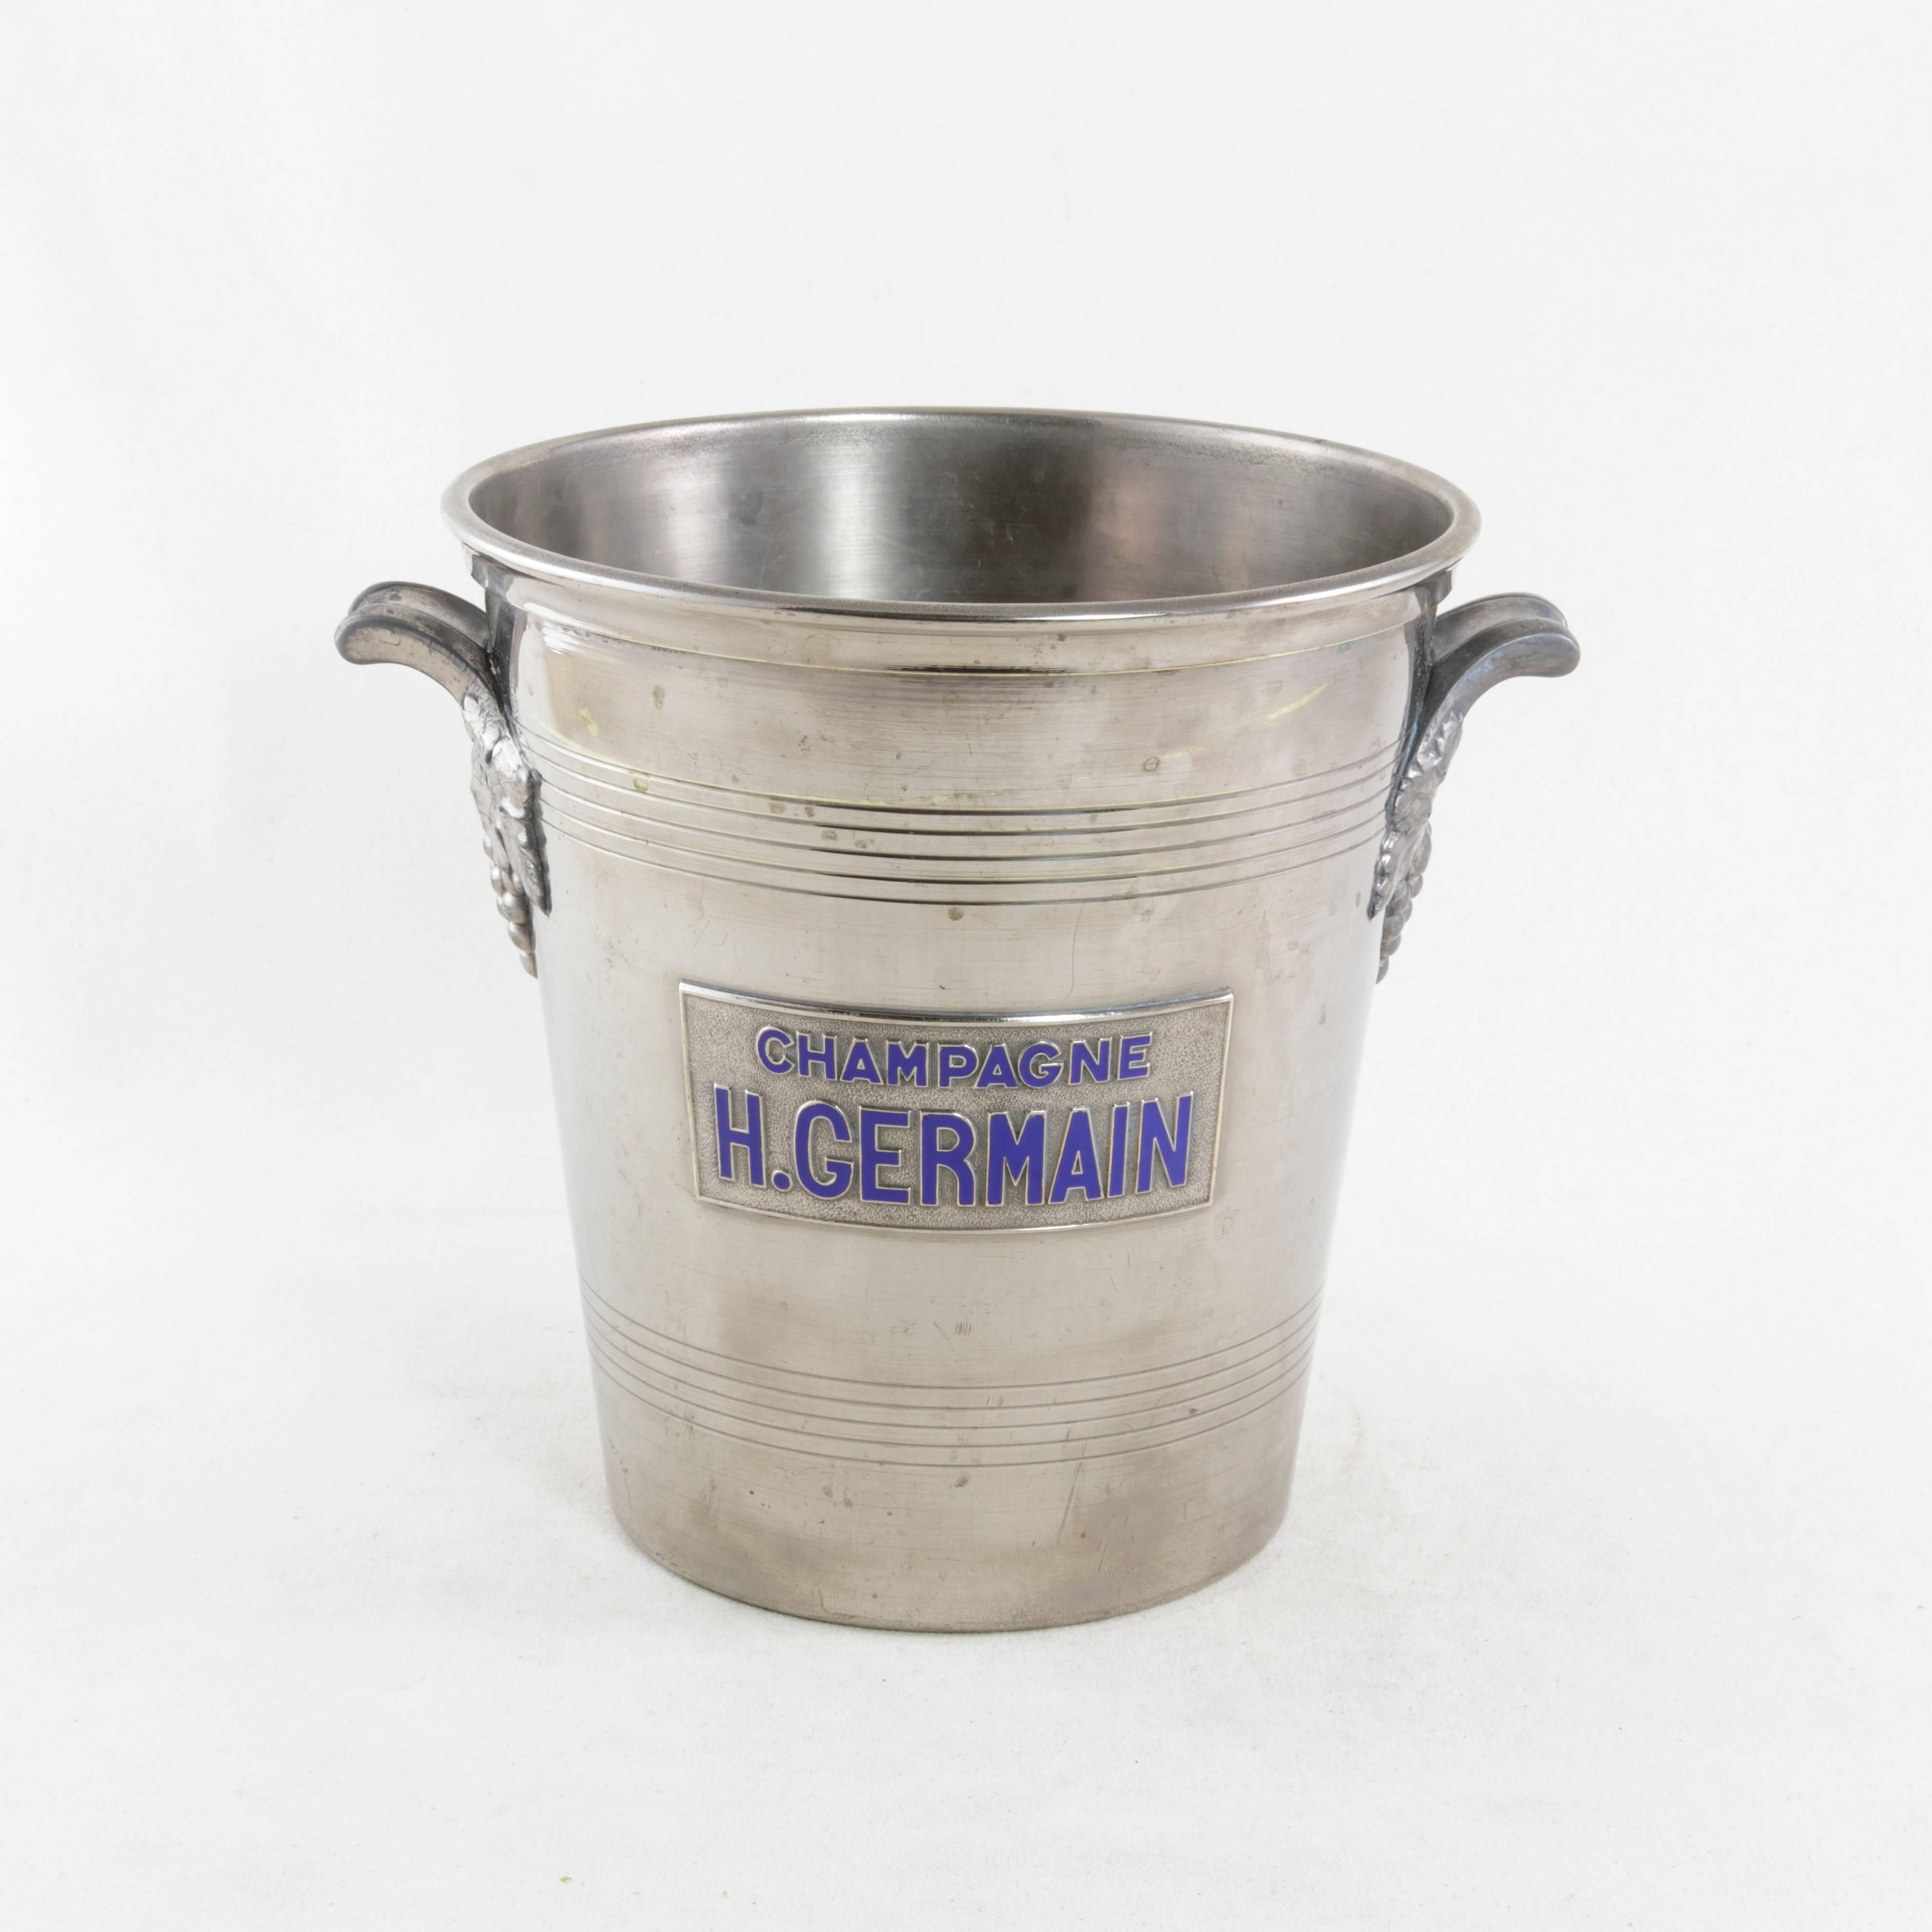 This mid-20th century French silver plate champagne bucket features a blue enameled label marked H. Germain, the name of a champagne production house founded in the late nineteenth century. Handles on each side display decorative clusters of grapes